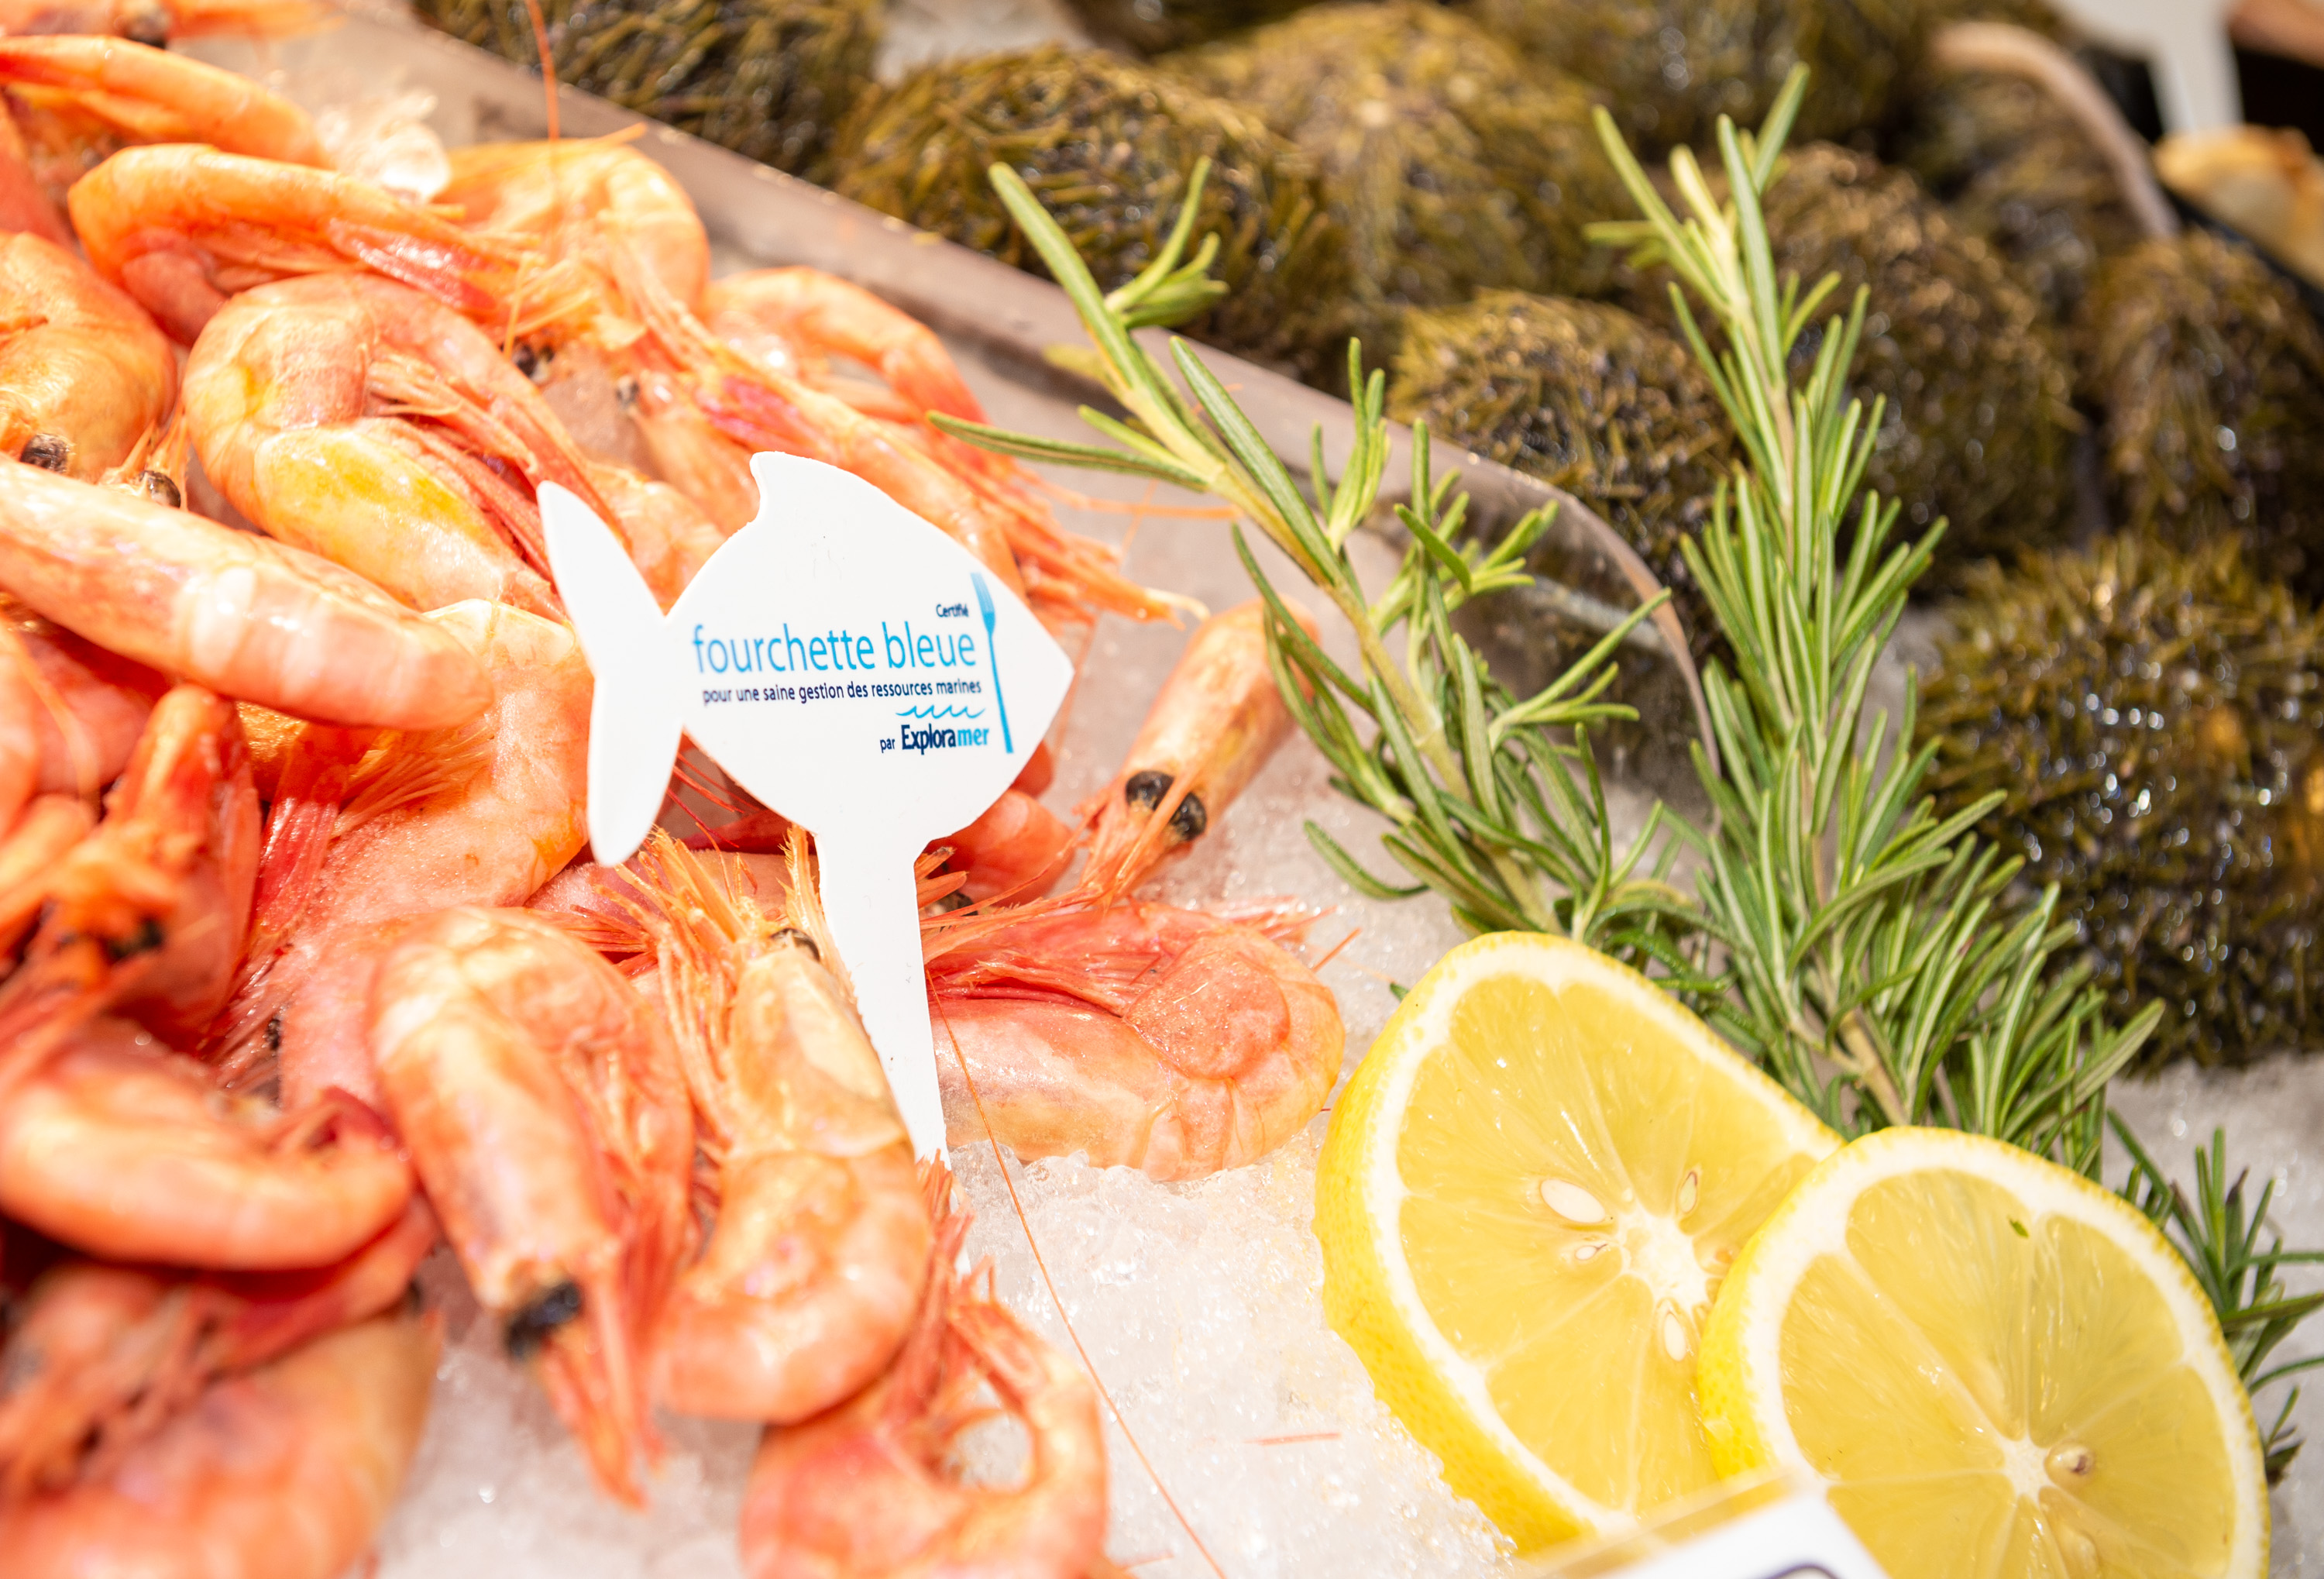 Smarter Seafood certification will be extended to all Metro stores in Quebec